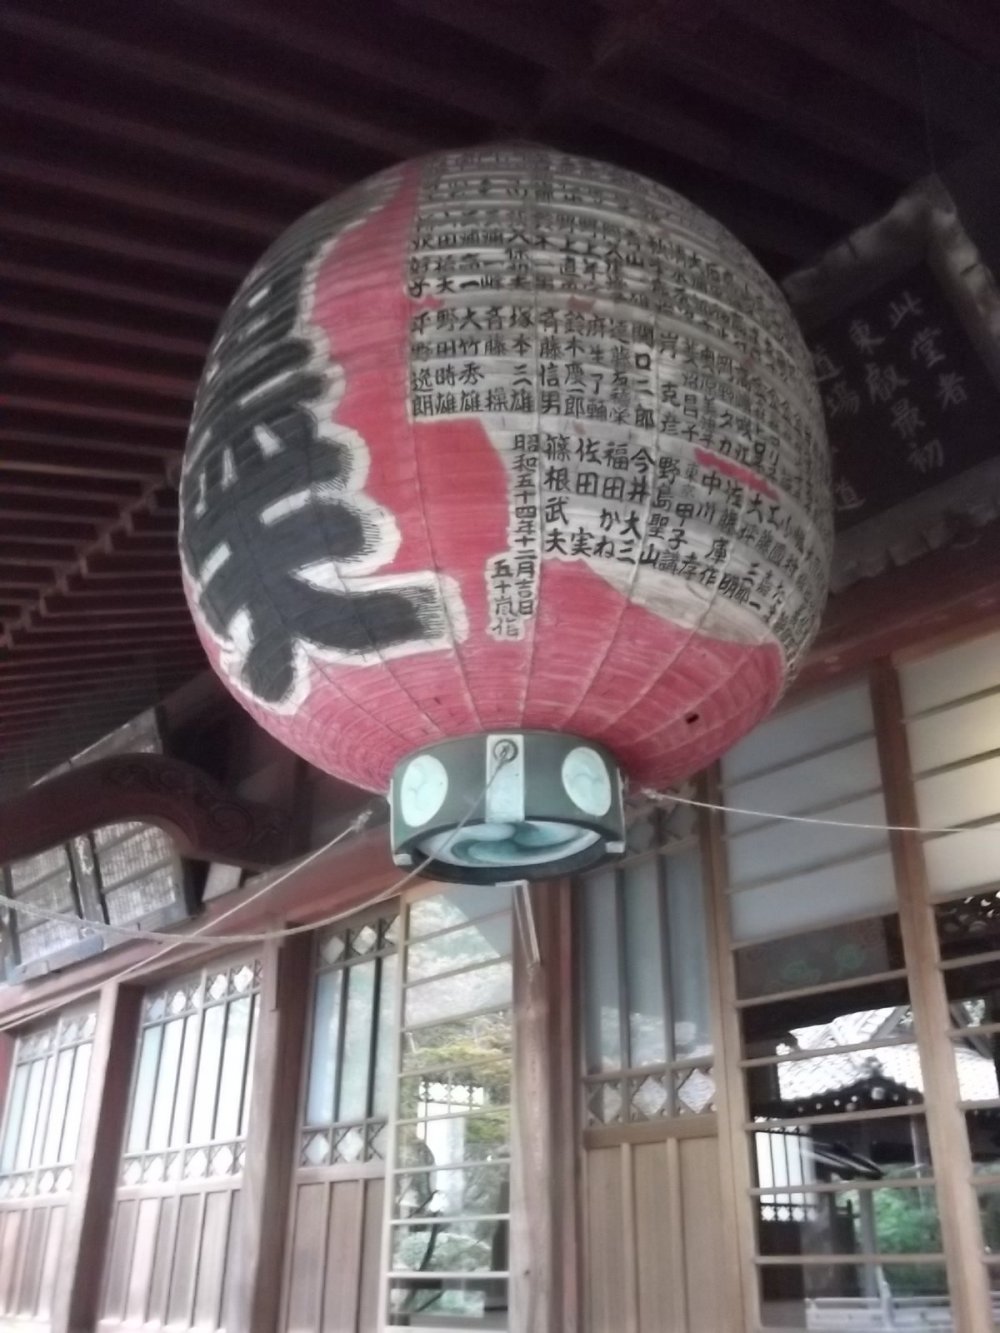 A big lantern at the entrance to the main hall